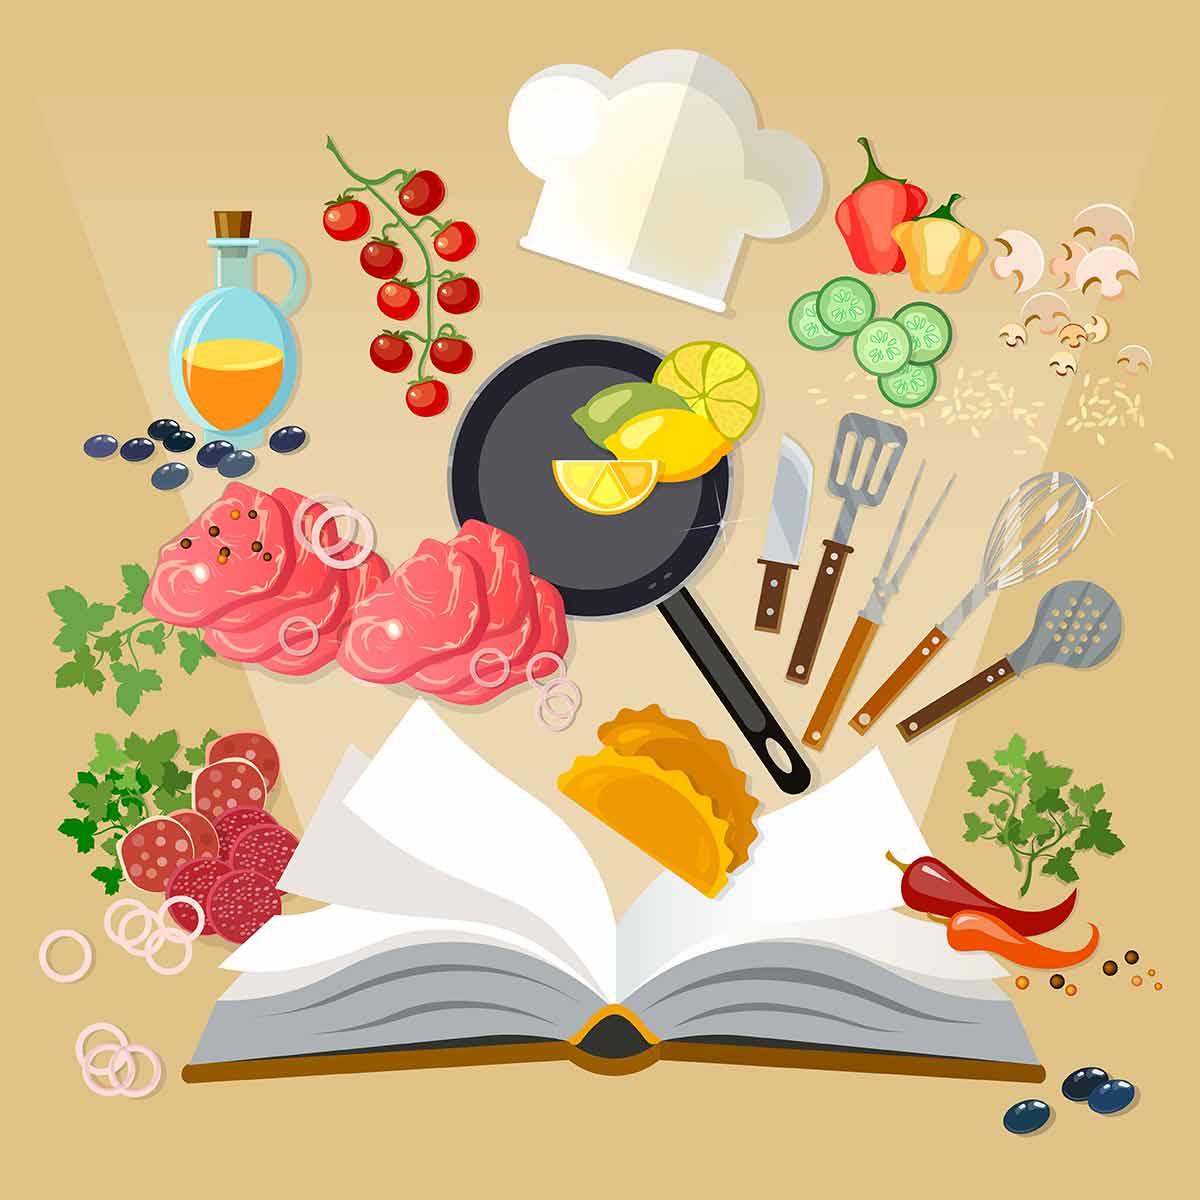 An illustration of ingredients and cooking utensils above a cookbook.